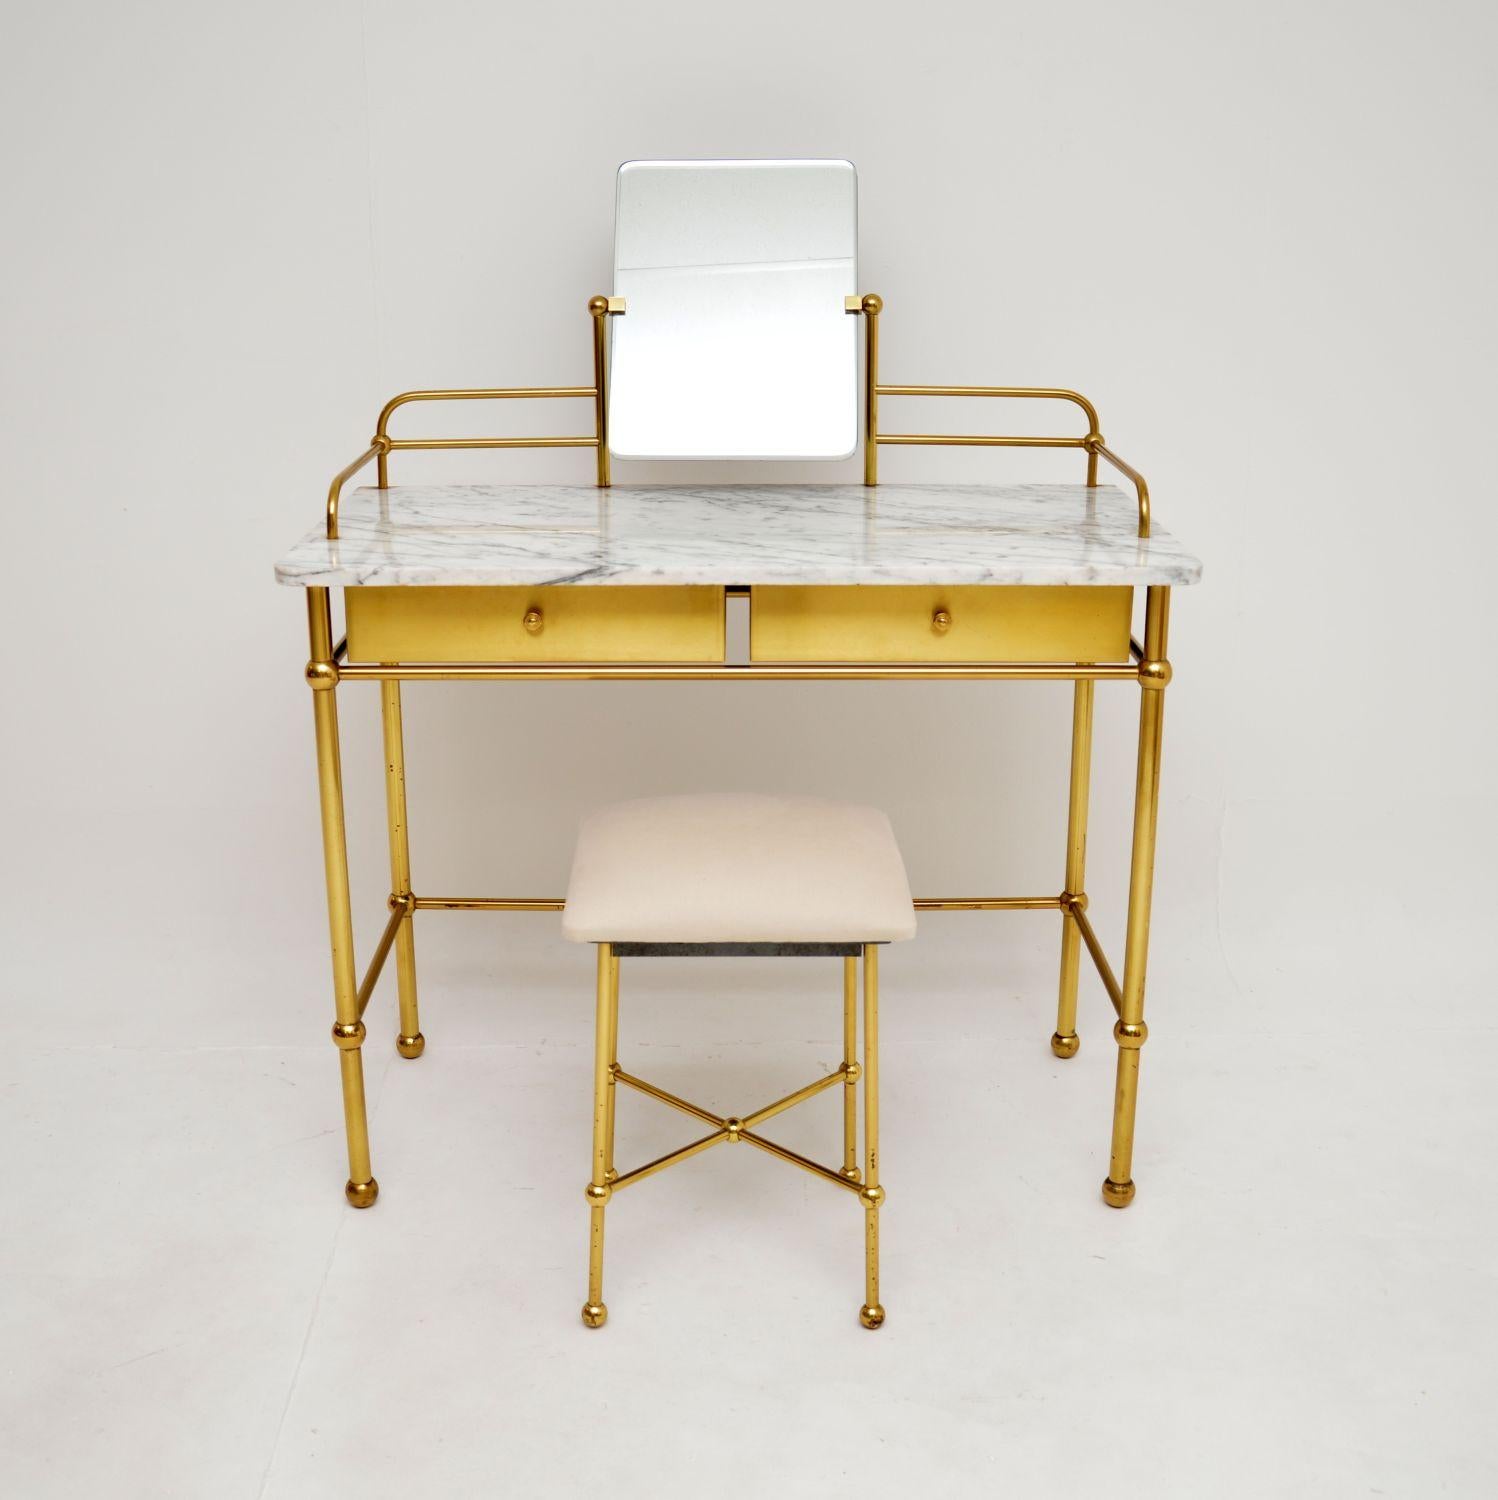 A stunning vintage French marble and brass dressing table by Georges Raimbaud for Resistub, circa 1960’s.

This is of absolutely outstanding quality, with an extremely beautiful and stylish design. This has a polished brass frame with brass fronted